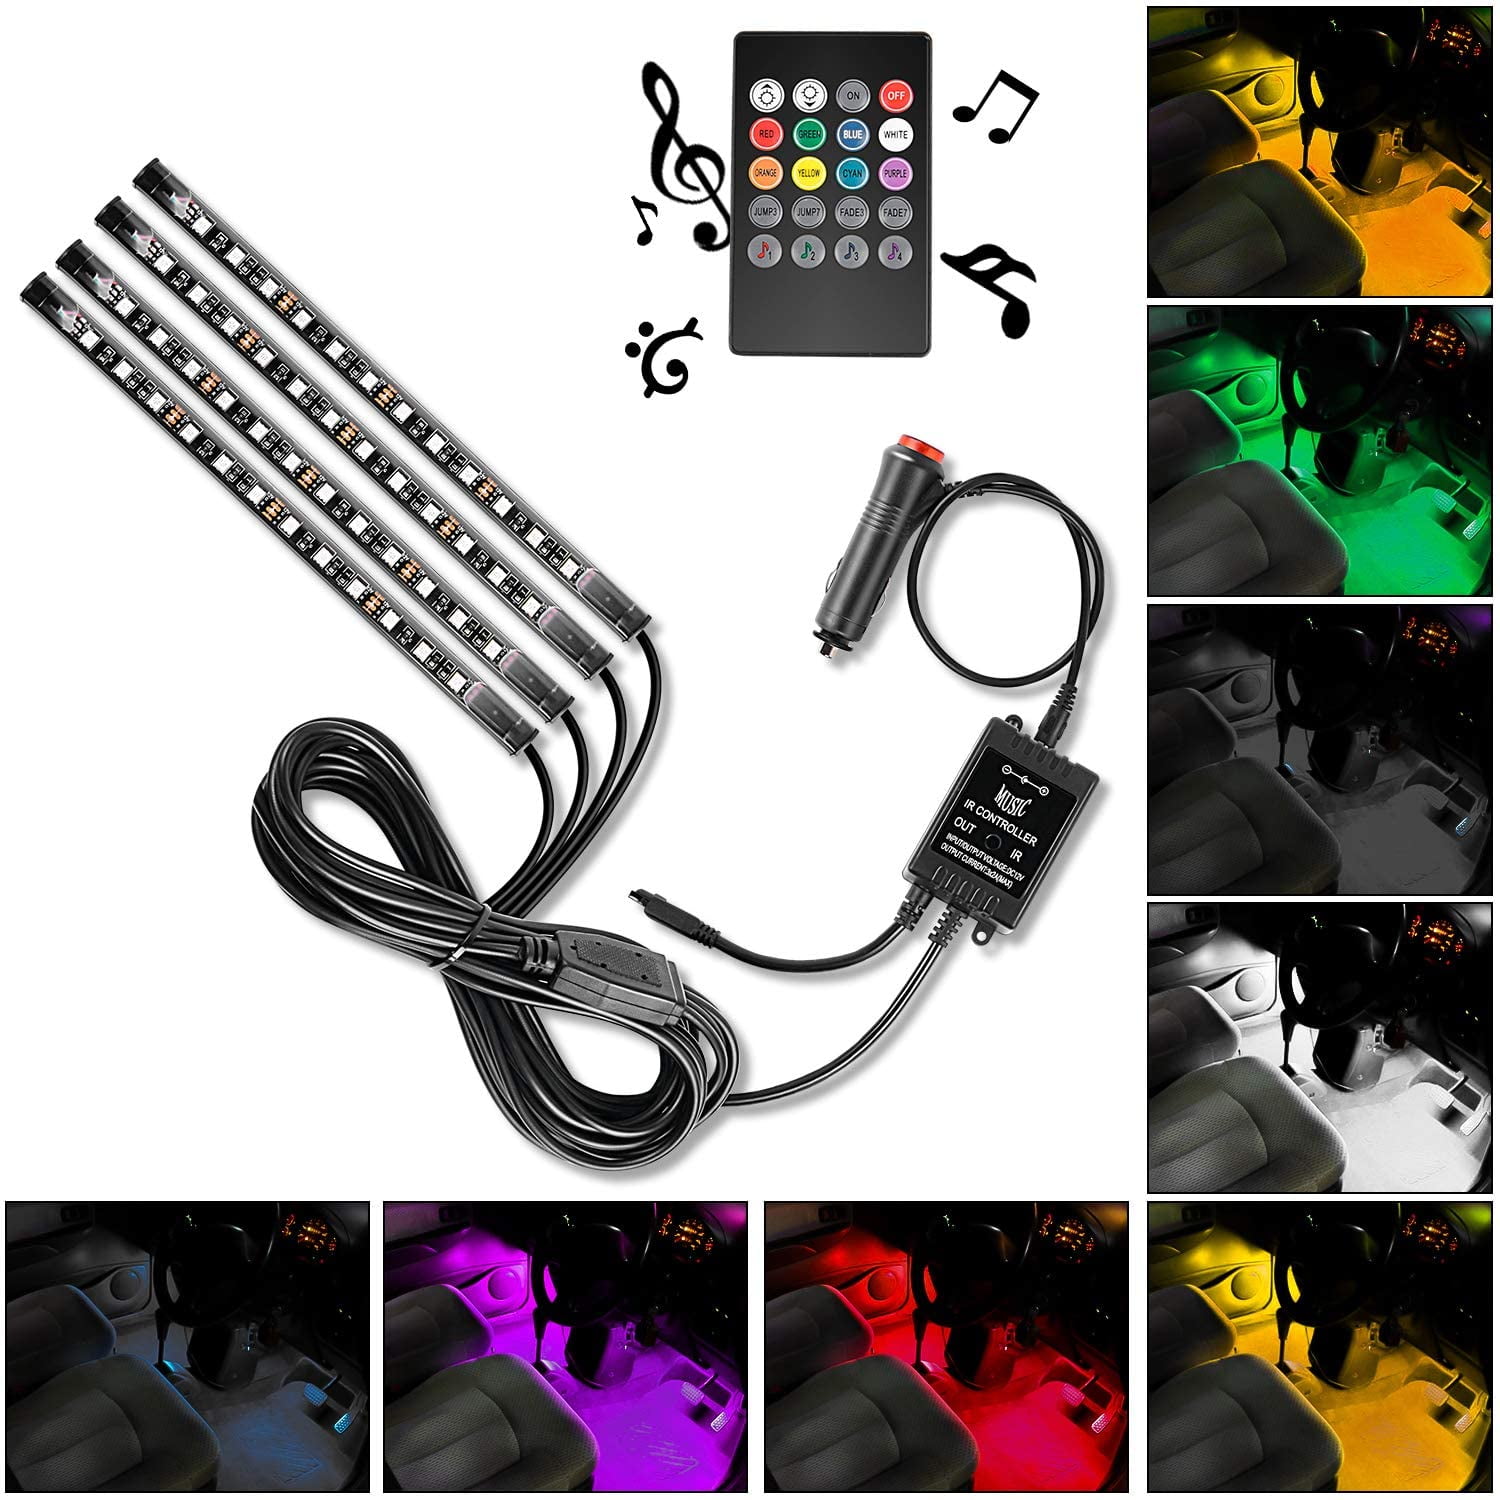 Nilight - TR-06 4pcs 48 LED Interior Lights DC 12V Multicolor Music Car Strip Light Under Dash Lighting Kit with Sound Active Function and Wireless